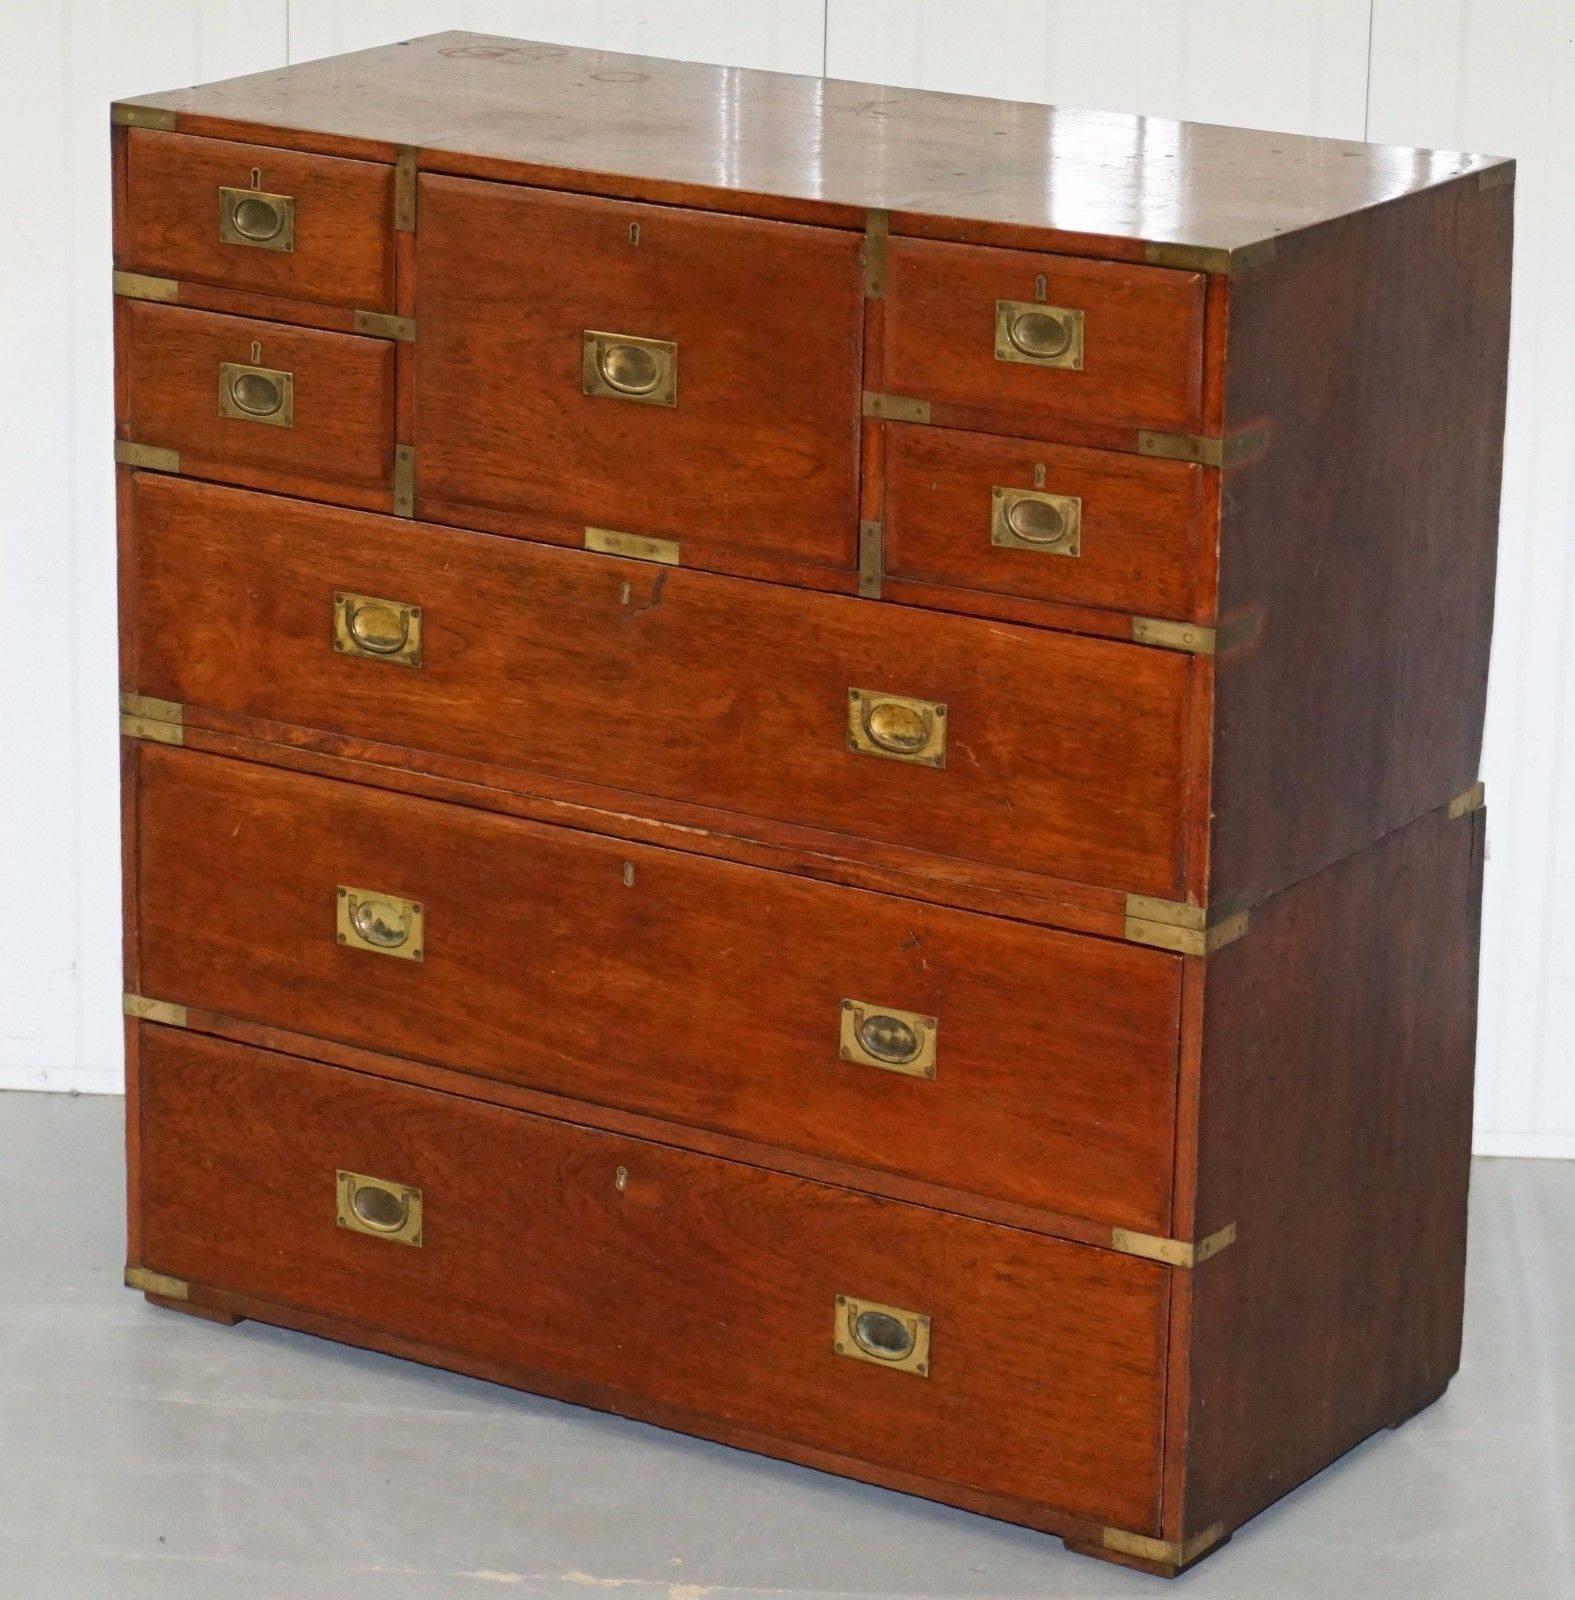 Wimbledon-Furniture

Wimbledon-Furniture is delighted to offer for sale this very original circa 1870 Military Campaign chest with exceptionally rare White & Co LTD transport labels

 

Its very rare to find a piece like this with transport